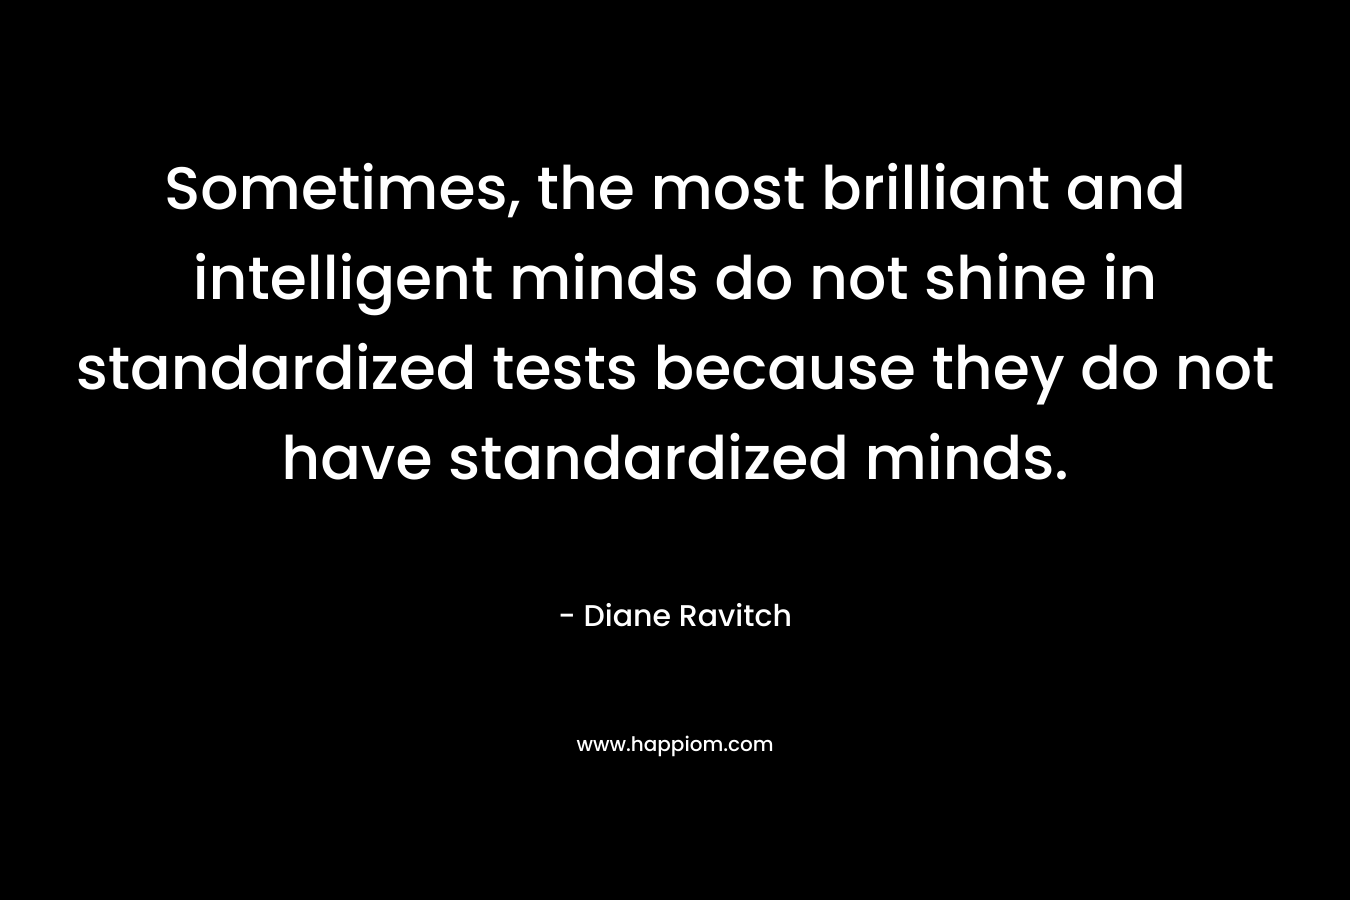 Sometimes, the most brilliant and intelligent minds do not shine in standardized tests because they do not have standardized minds.